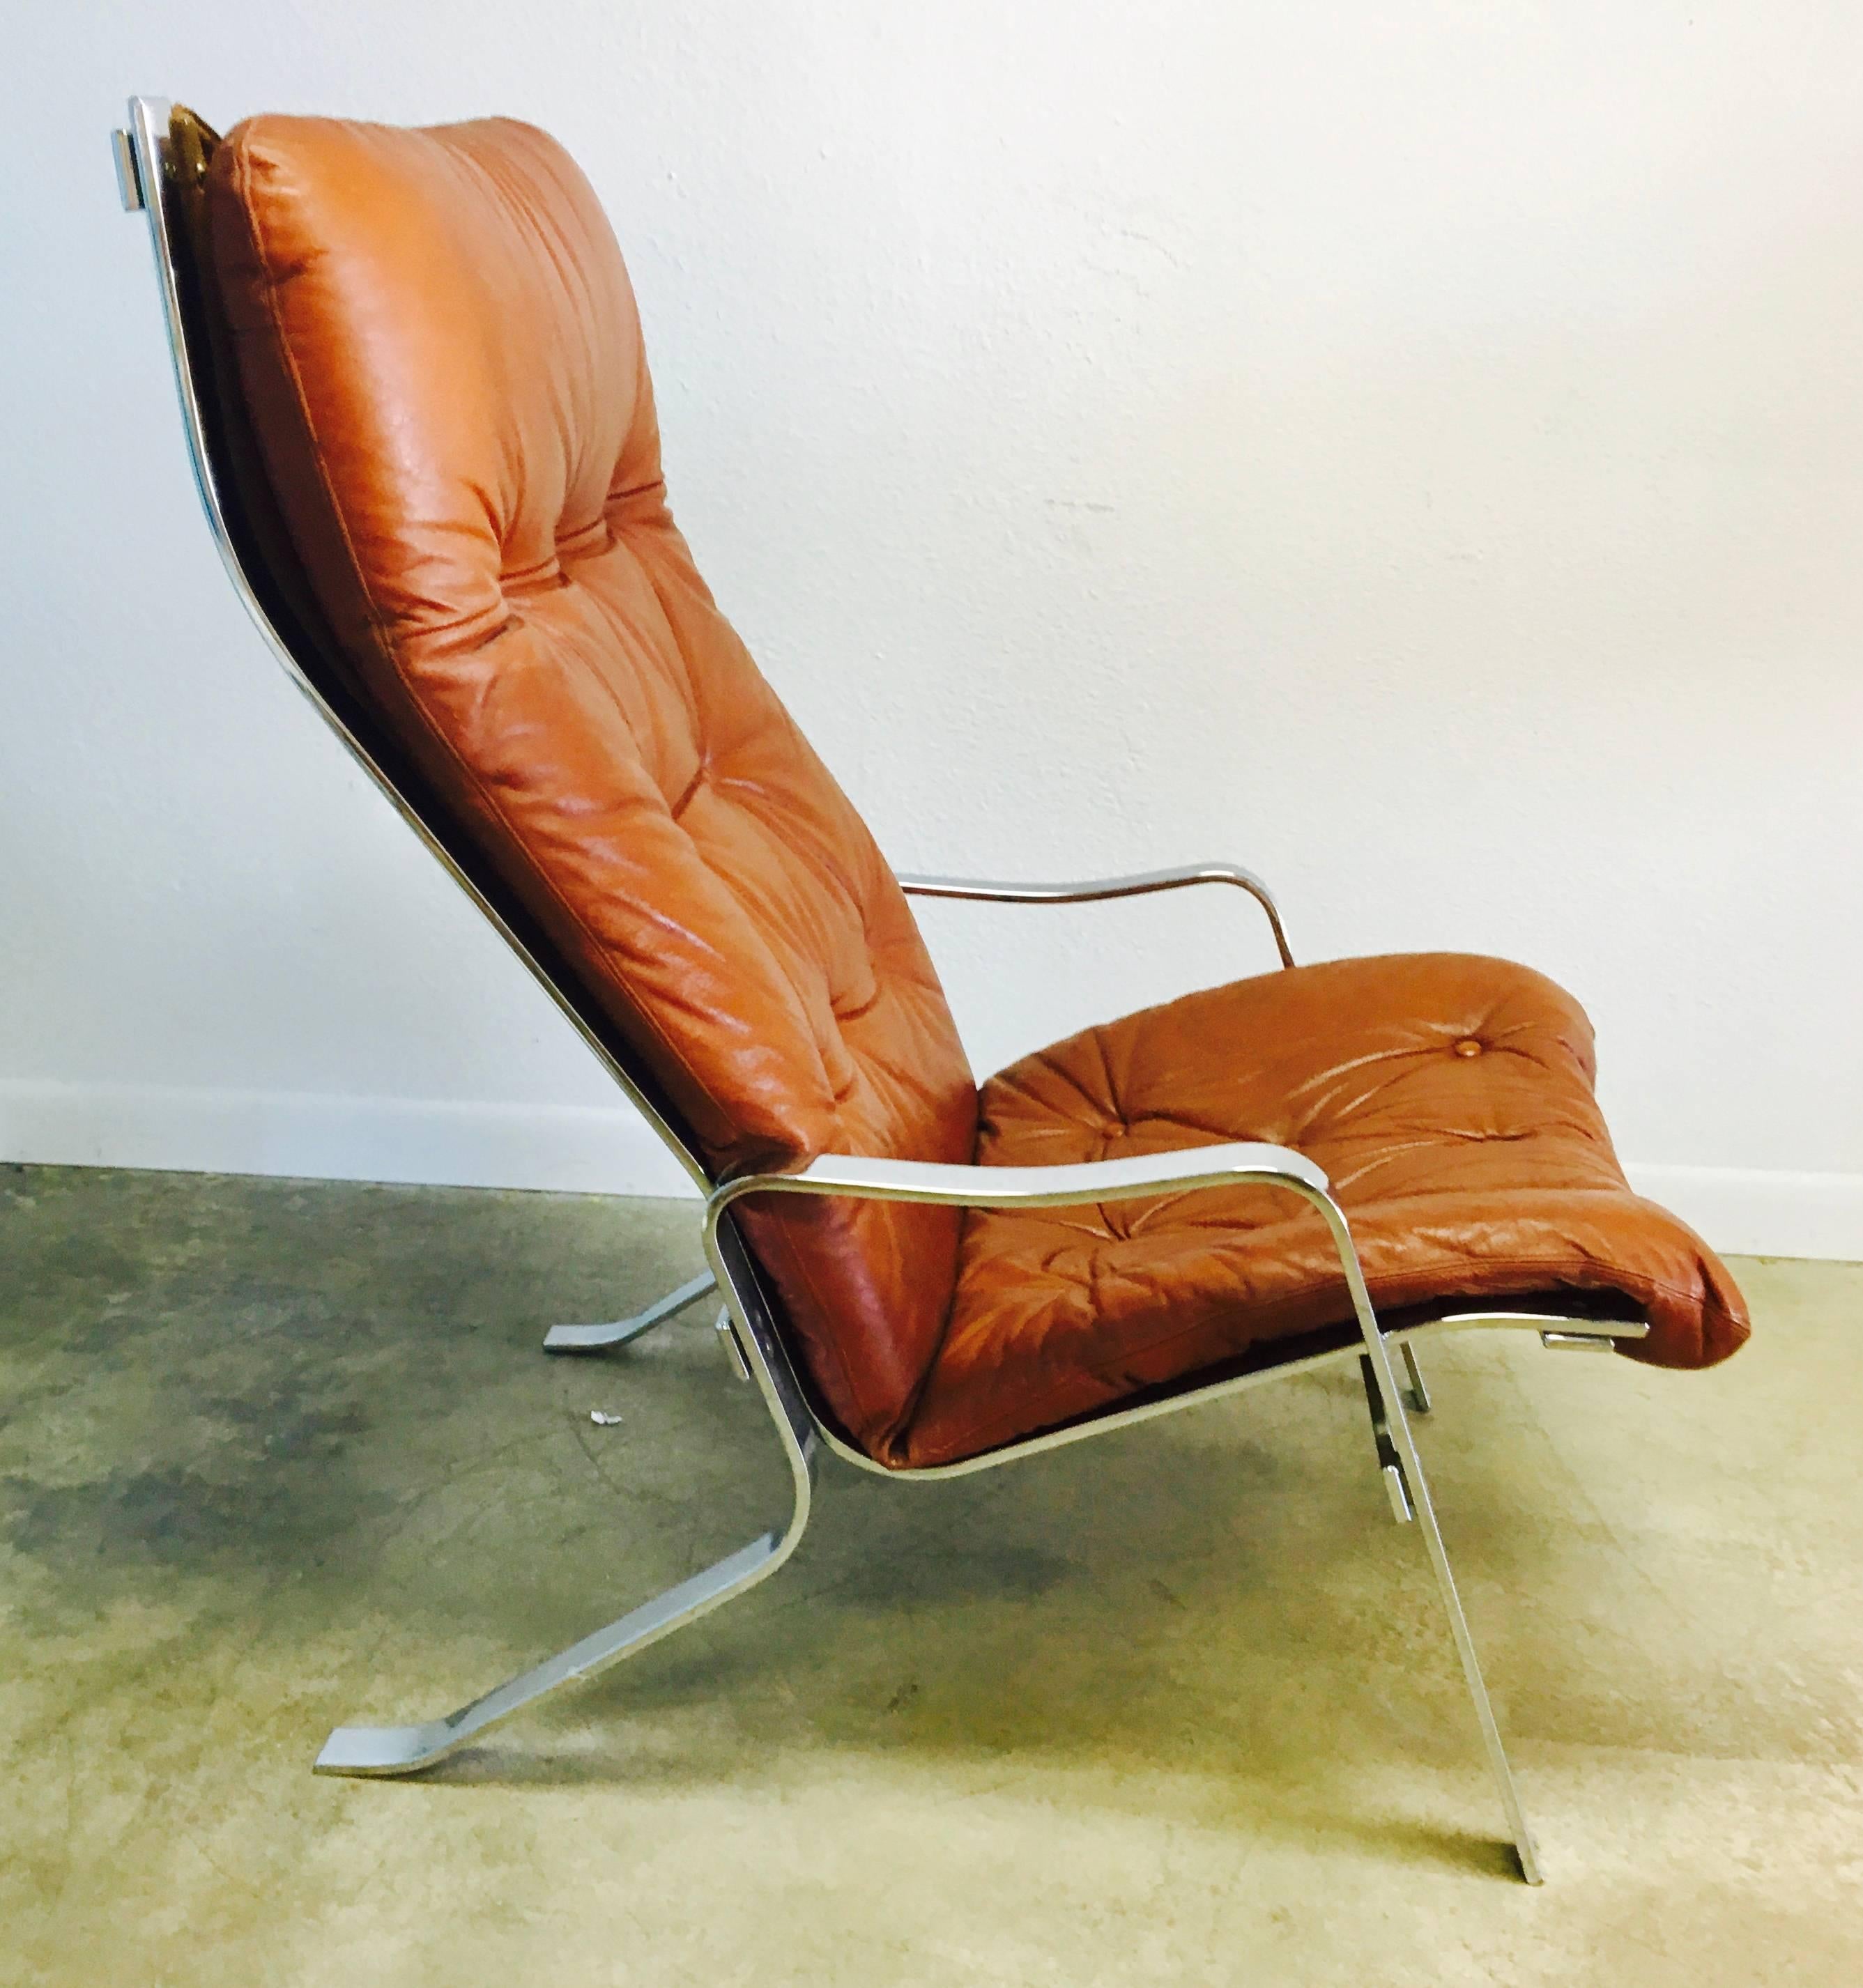 Sumptuous tufted leather corset-tied with leather to a fabric sling creates an ergonomic lounge chair that exemplifies stellar Swedish design. The angular solid chrome base is substantial. Very much in the manner of Arne Norell this 1970s piece